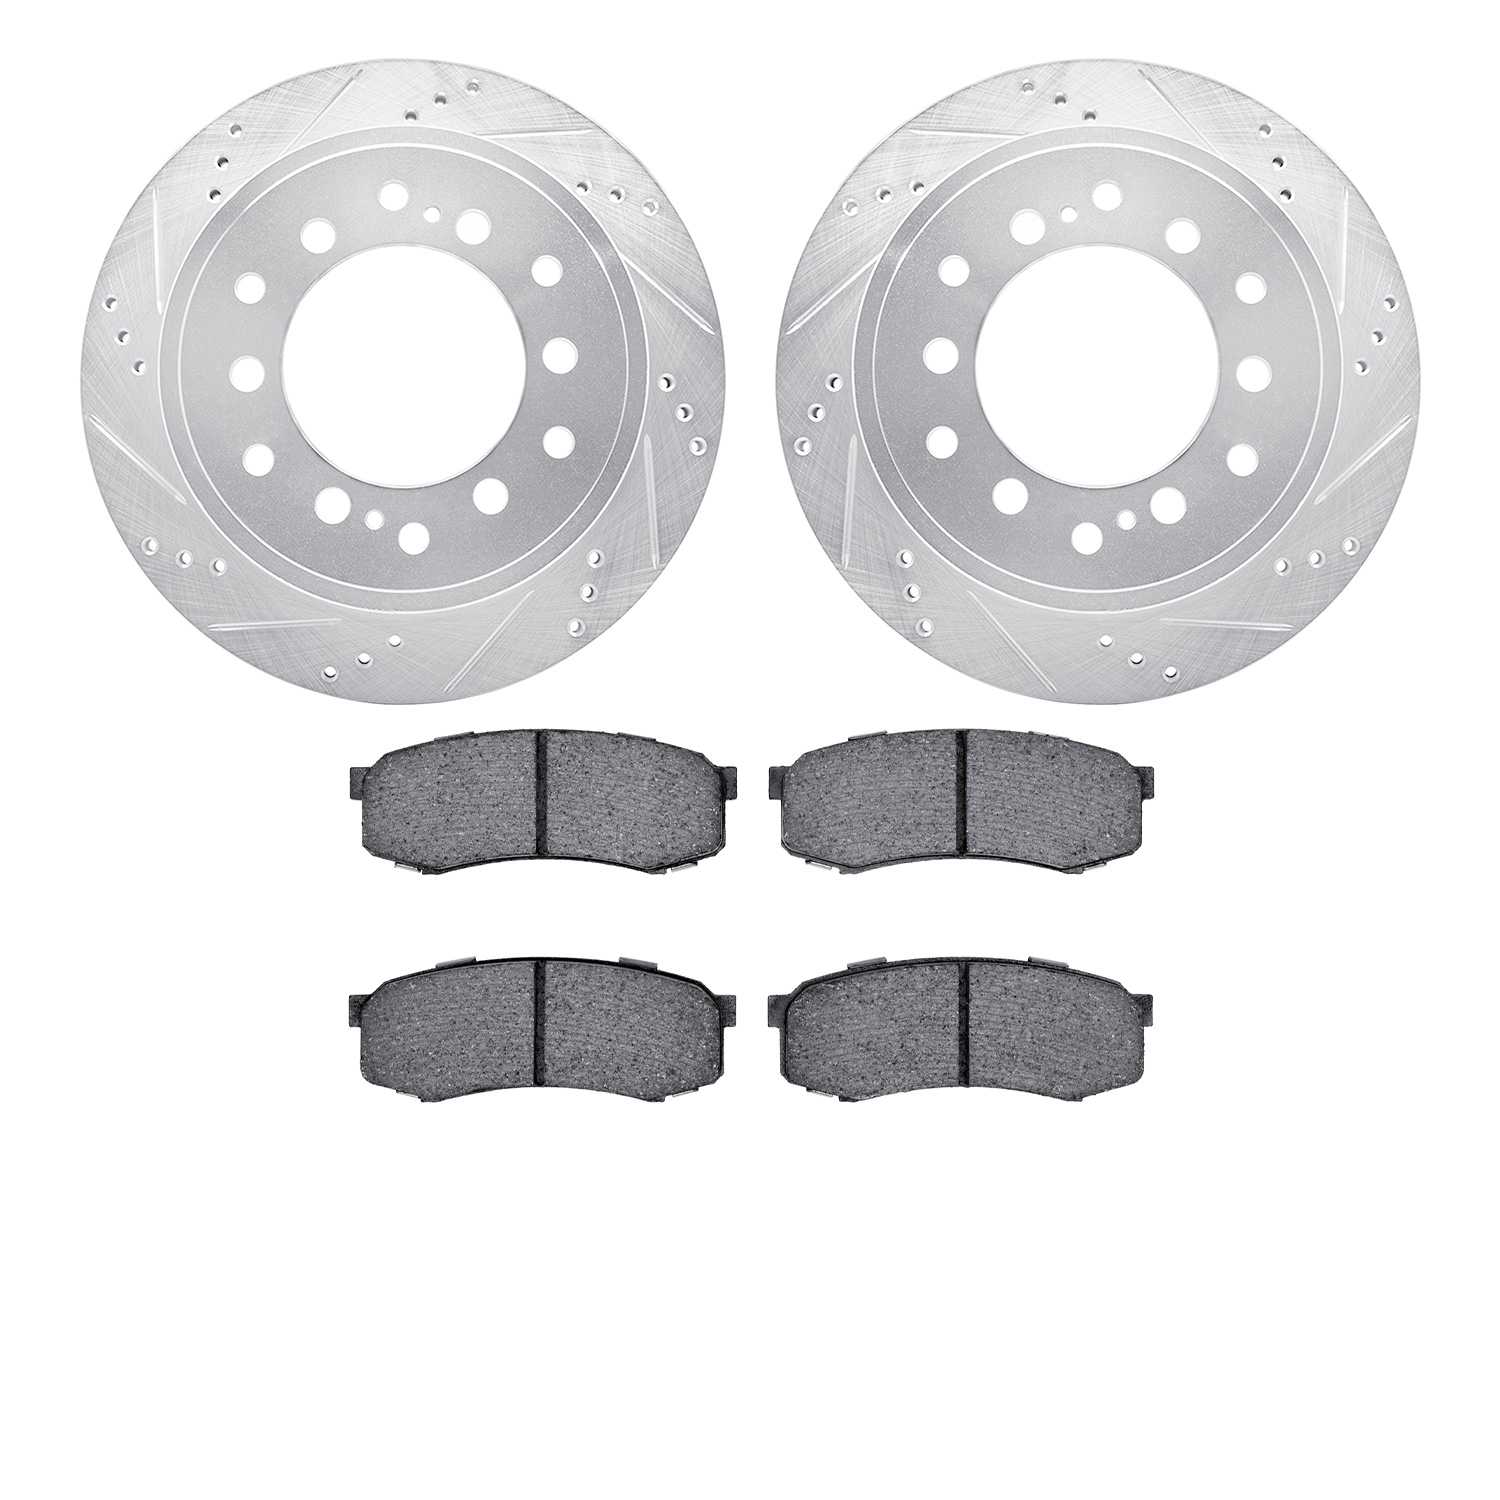 7302-76100 Drilled/Slotted Brake Rotor with 3000-Series Ceramic Brake Pads Kit [Silver], Fits Select Lexus/Toyota/Scion, Positio